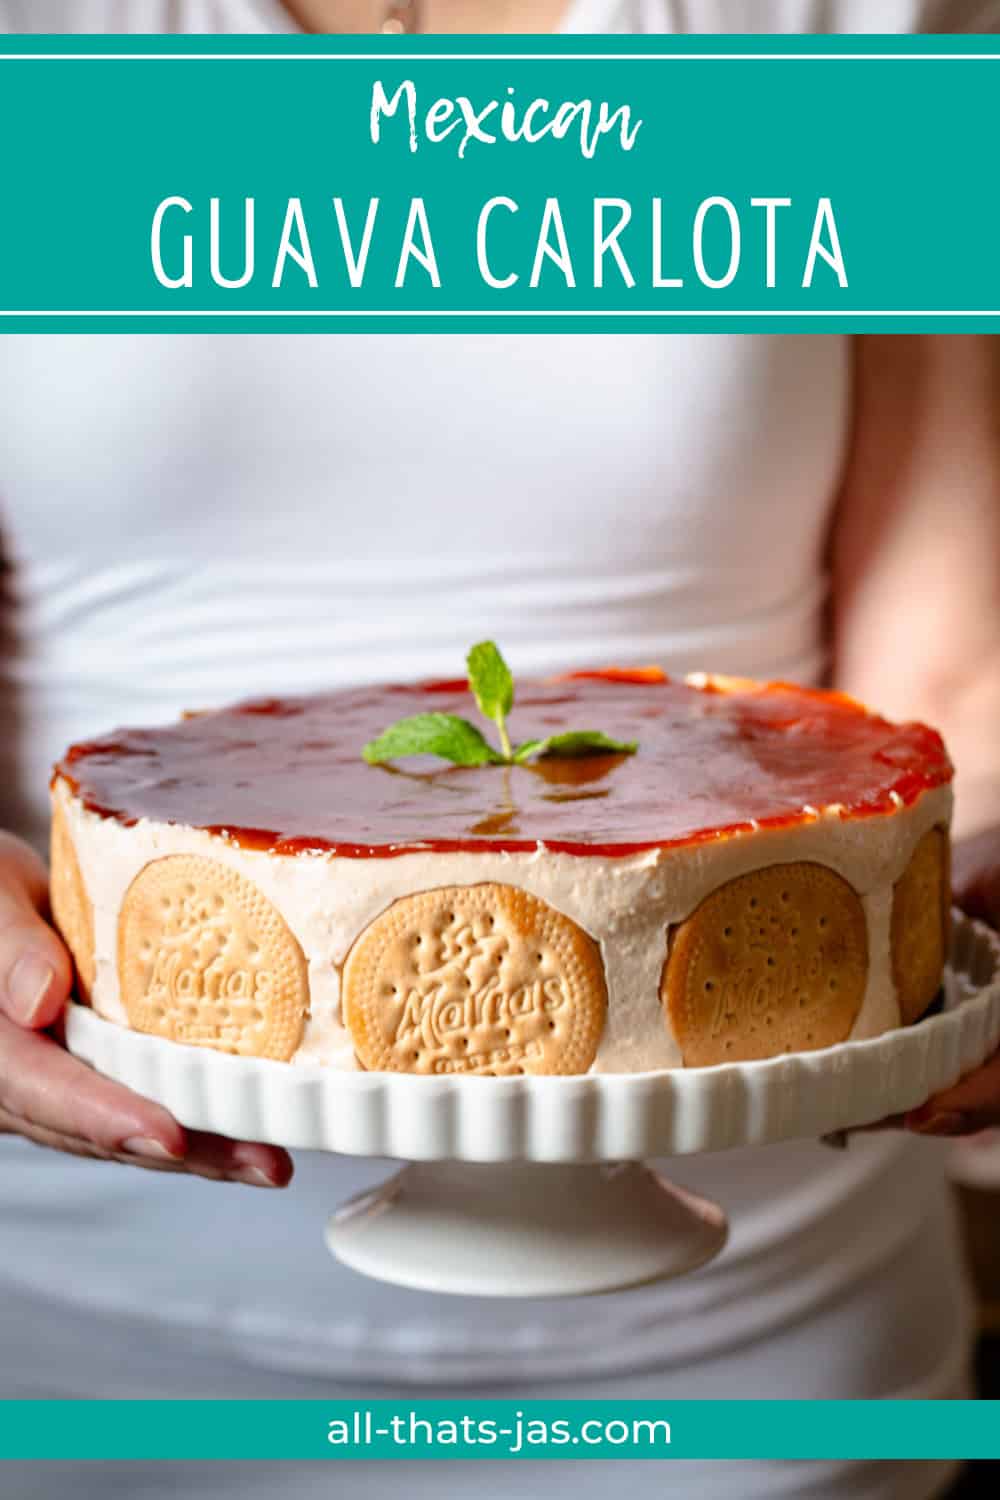 A person holding cake stand with guava Charlotte, with text overlay.